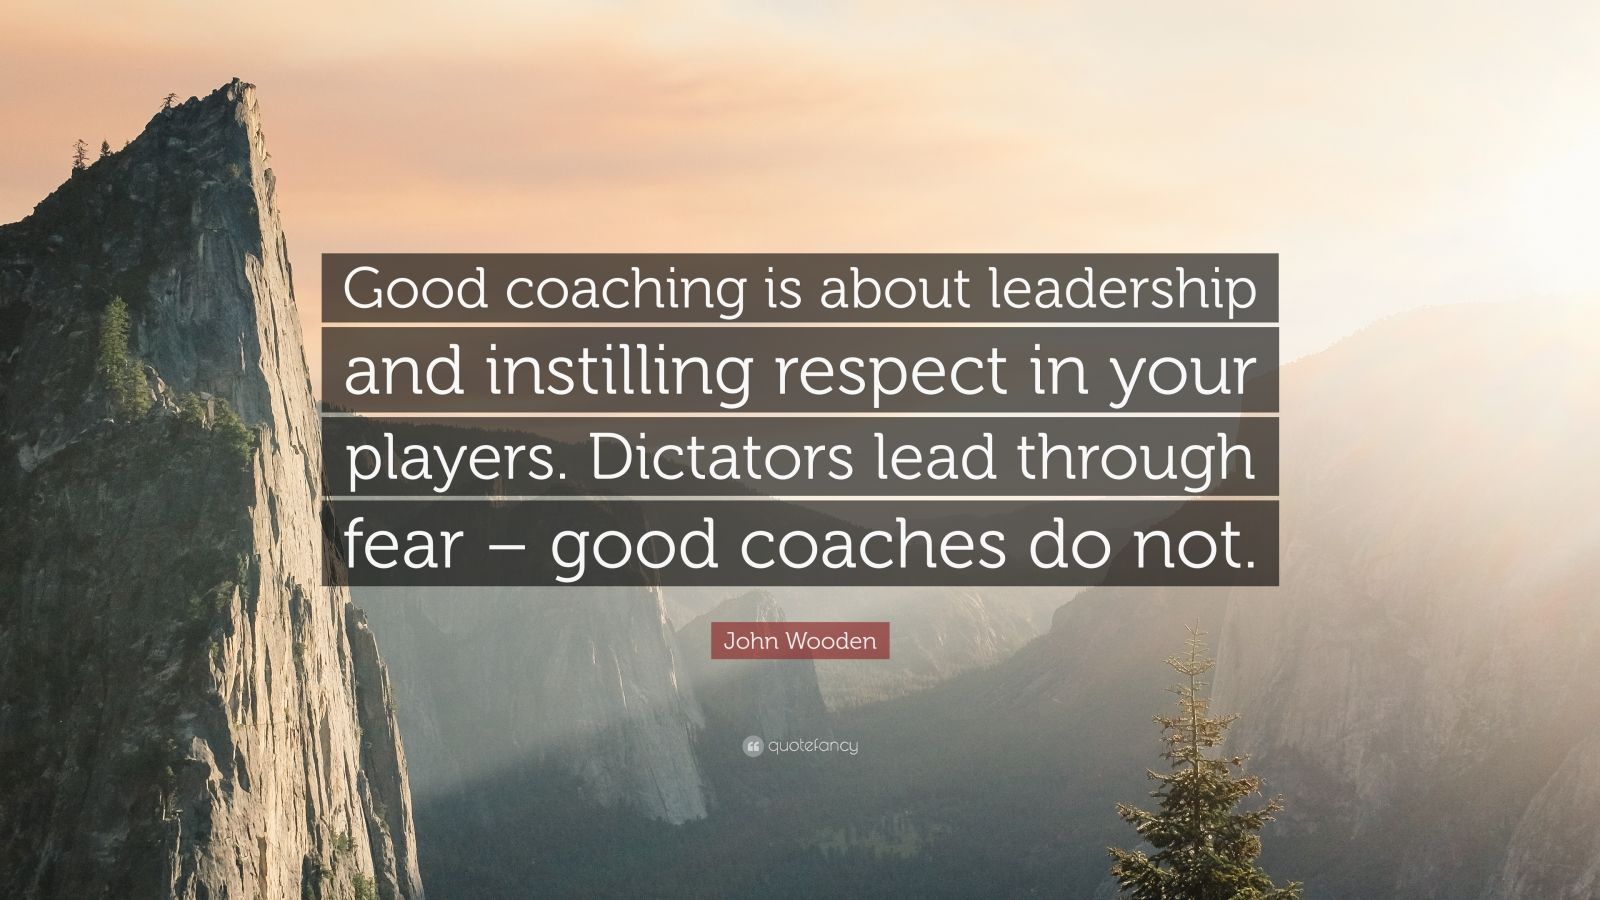 John Wooden Quote: “Good coaching is about leadership and instilling